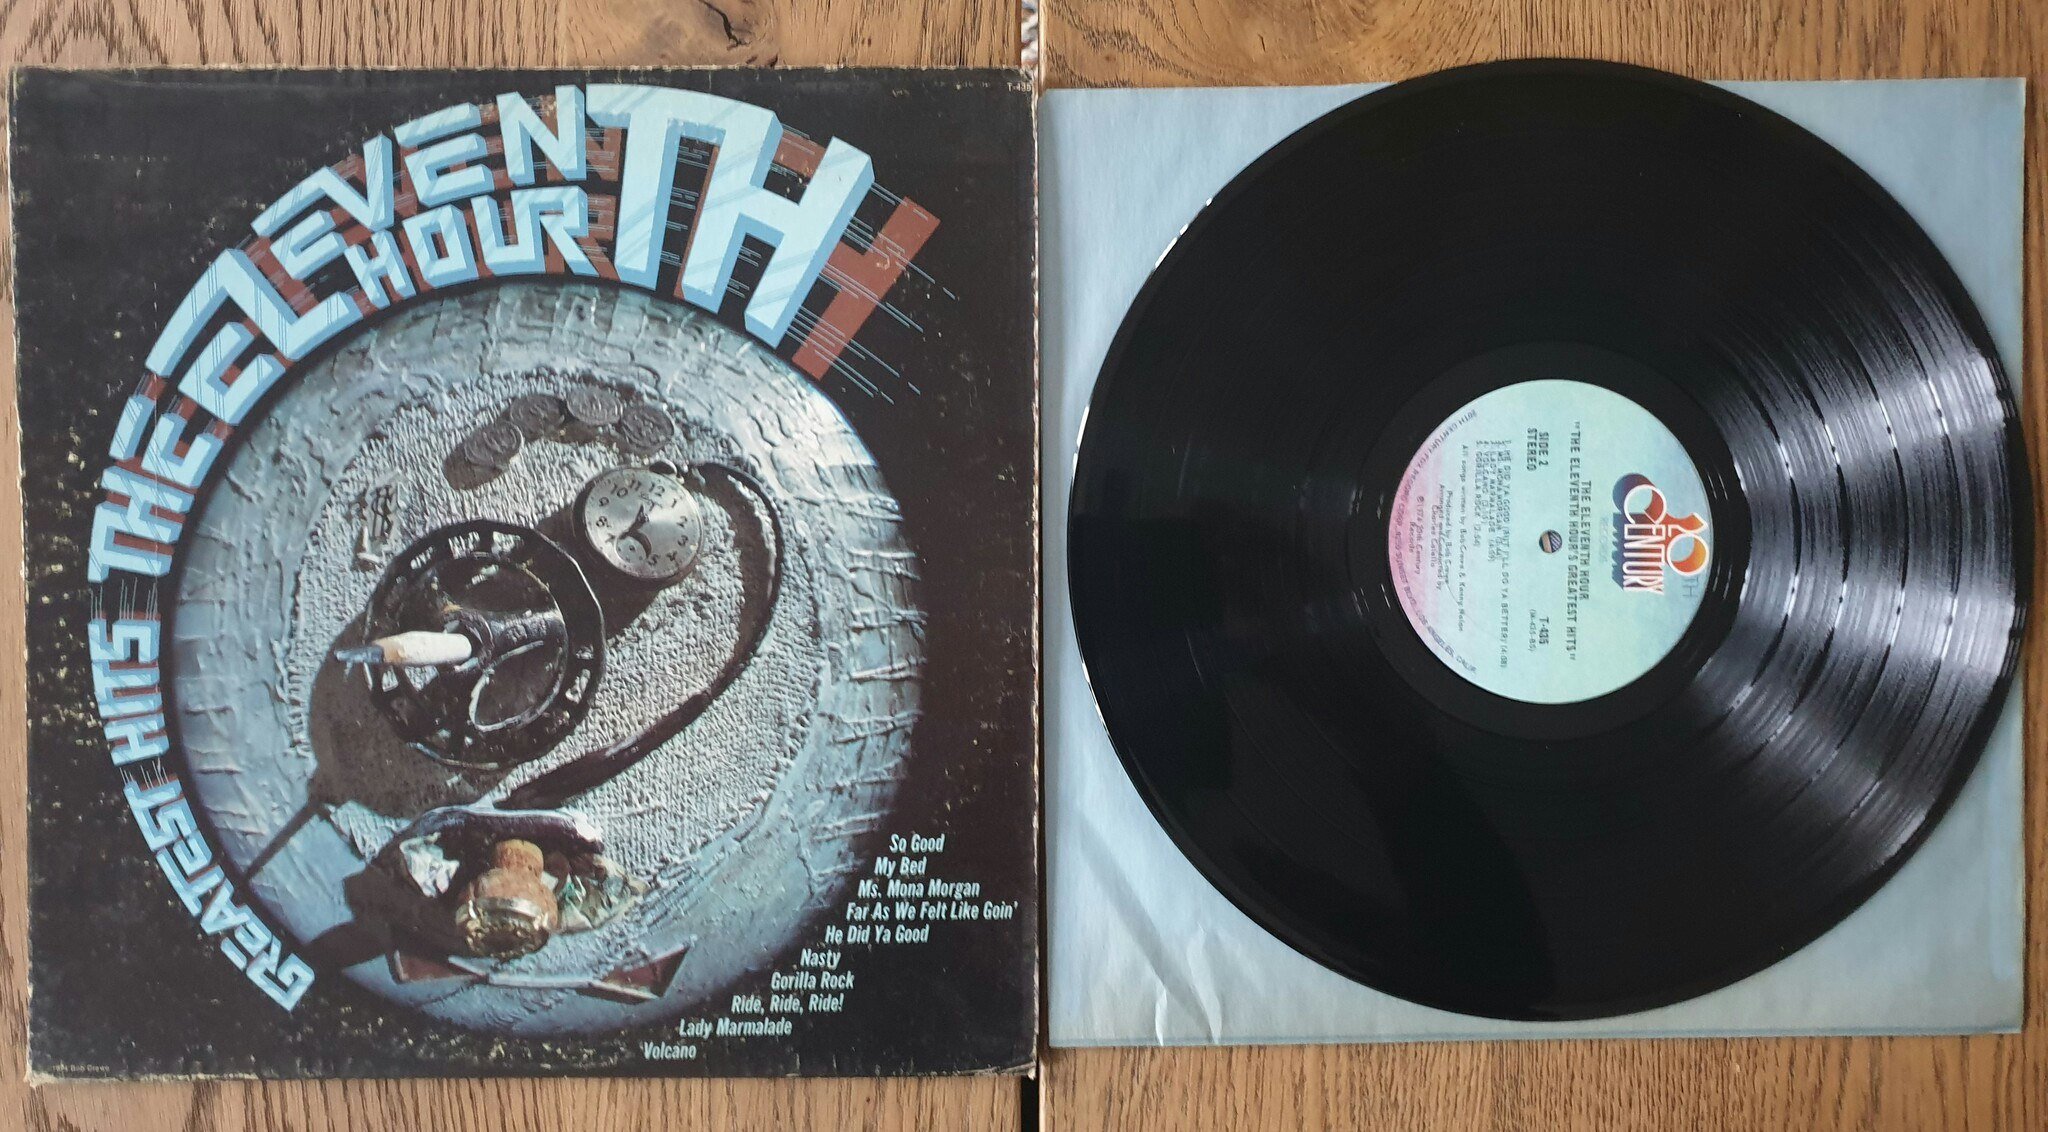 The Eleventh hour, Greatest hits. Vinyl LP